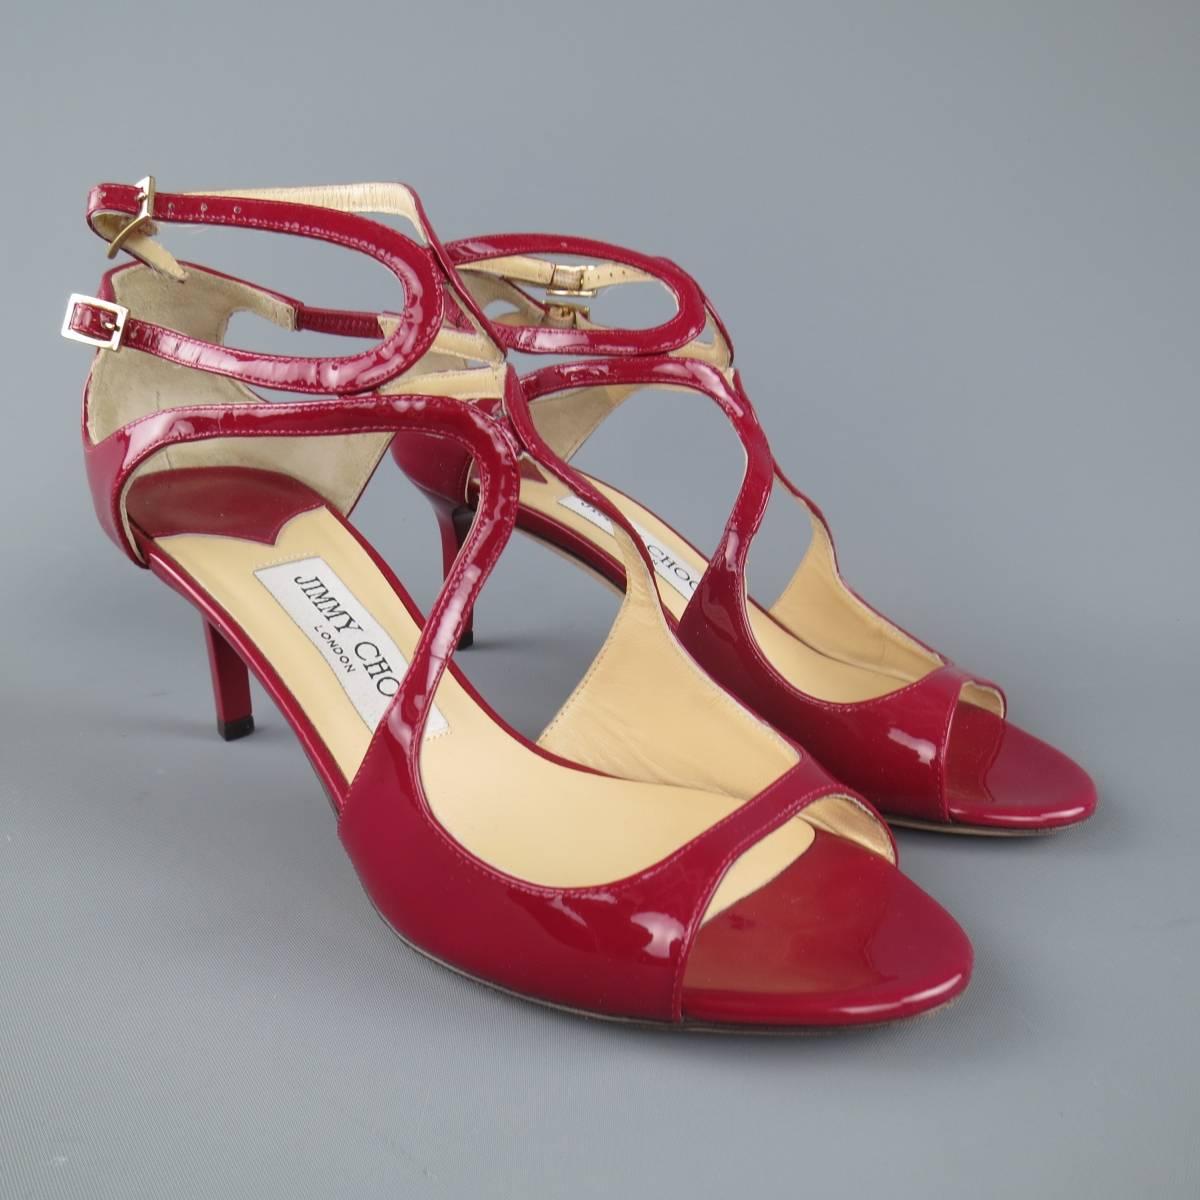 JIMMY CHOO "Lang" sandals come in a dark red patent leather and feature symmetrical curved straps. Made in Italy.
 
Excellent Pre-Owned Condition.
Marked: IT 36
 
Heel: 2.5 in.


Web ID: 80849 